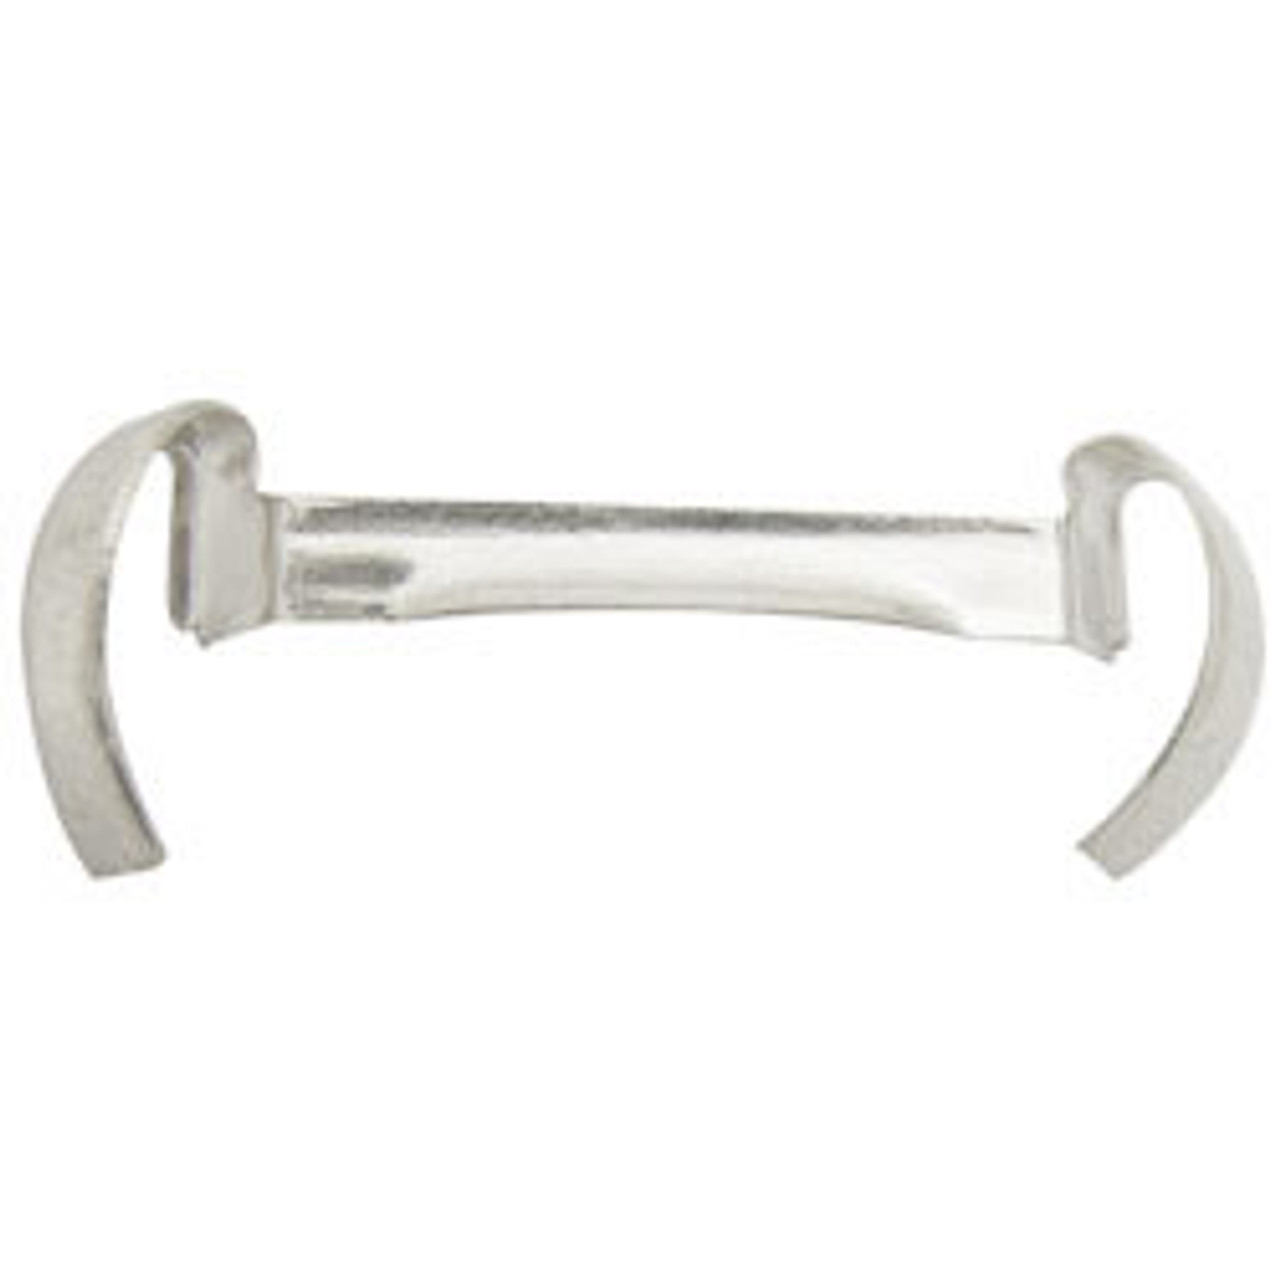 Ring Guard 25gm - Subhlaxmi Grocers